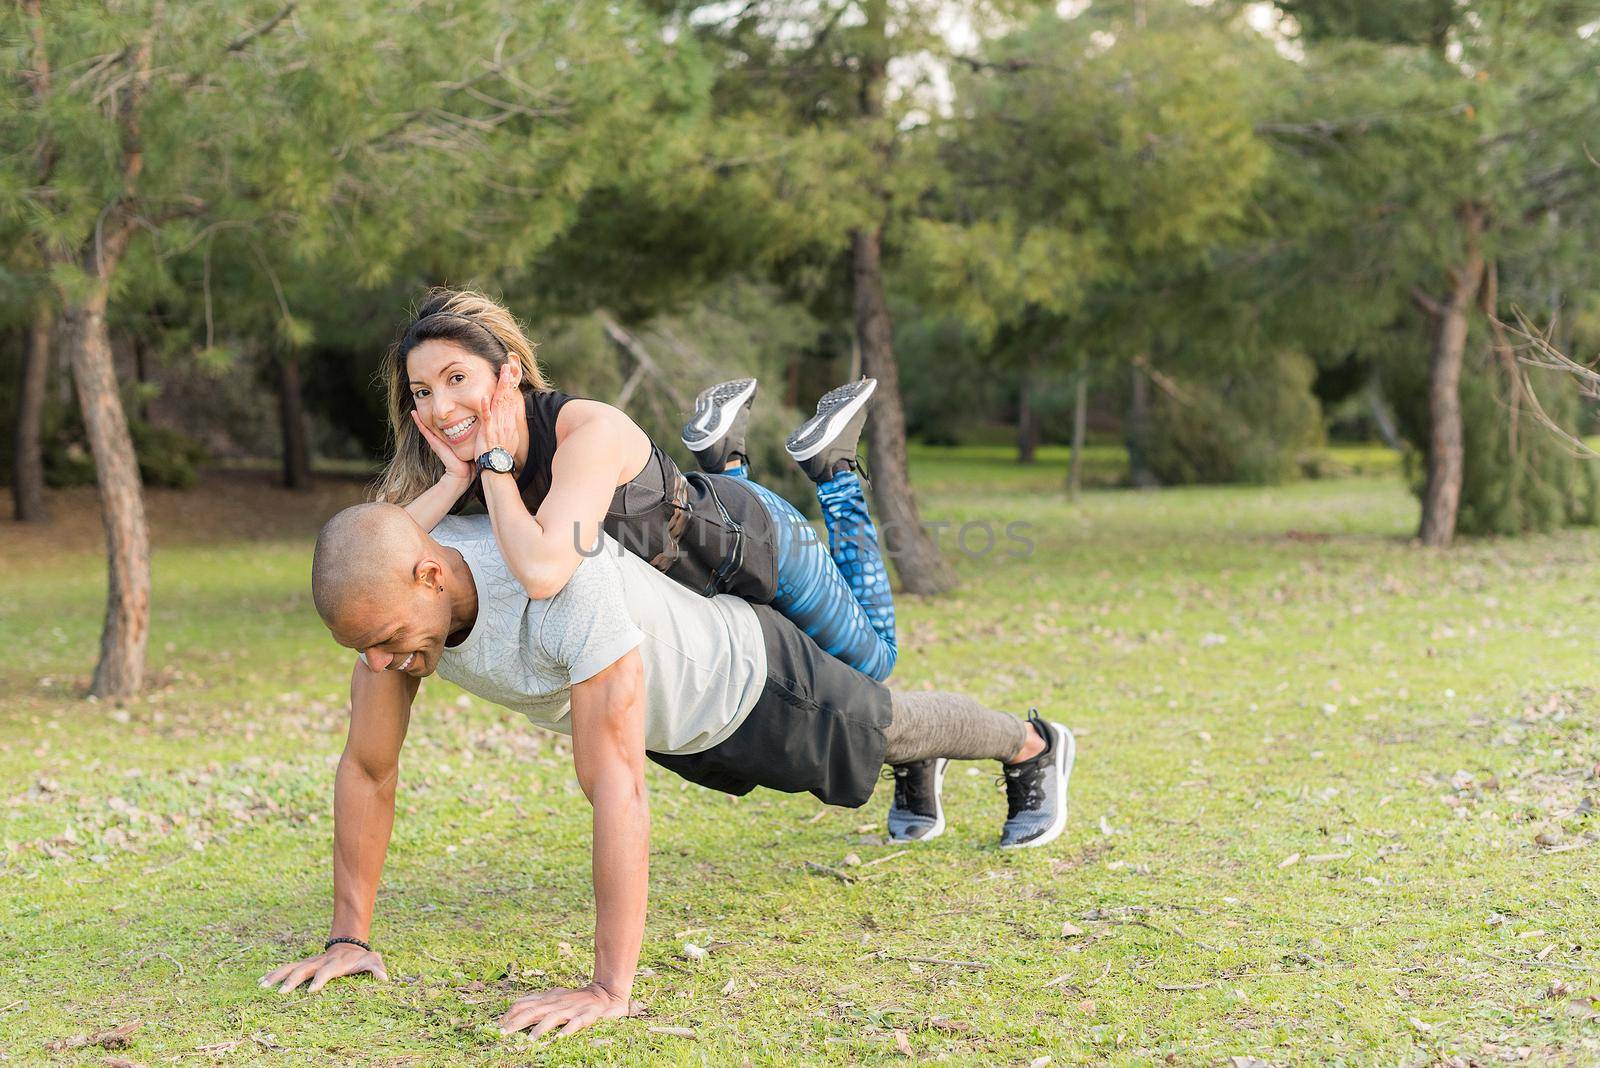 Fitness couple doing push-ups in the park. Multi-ethnic people exercising outdoors.